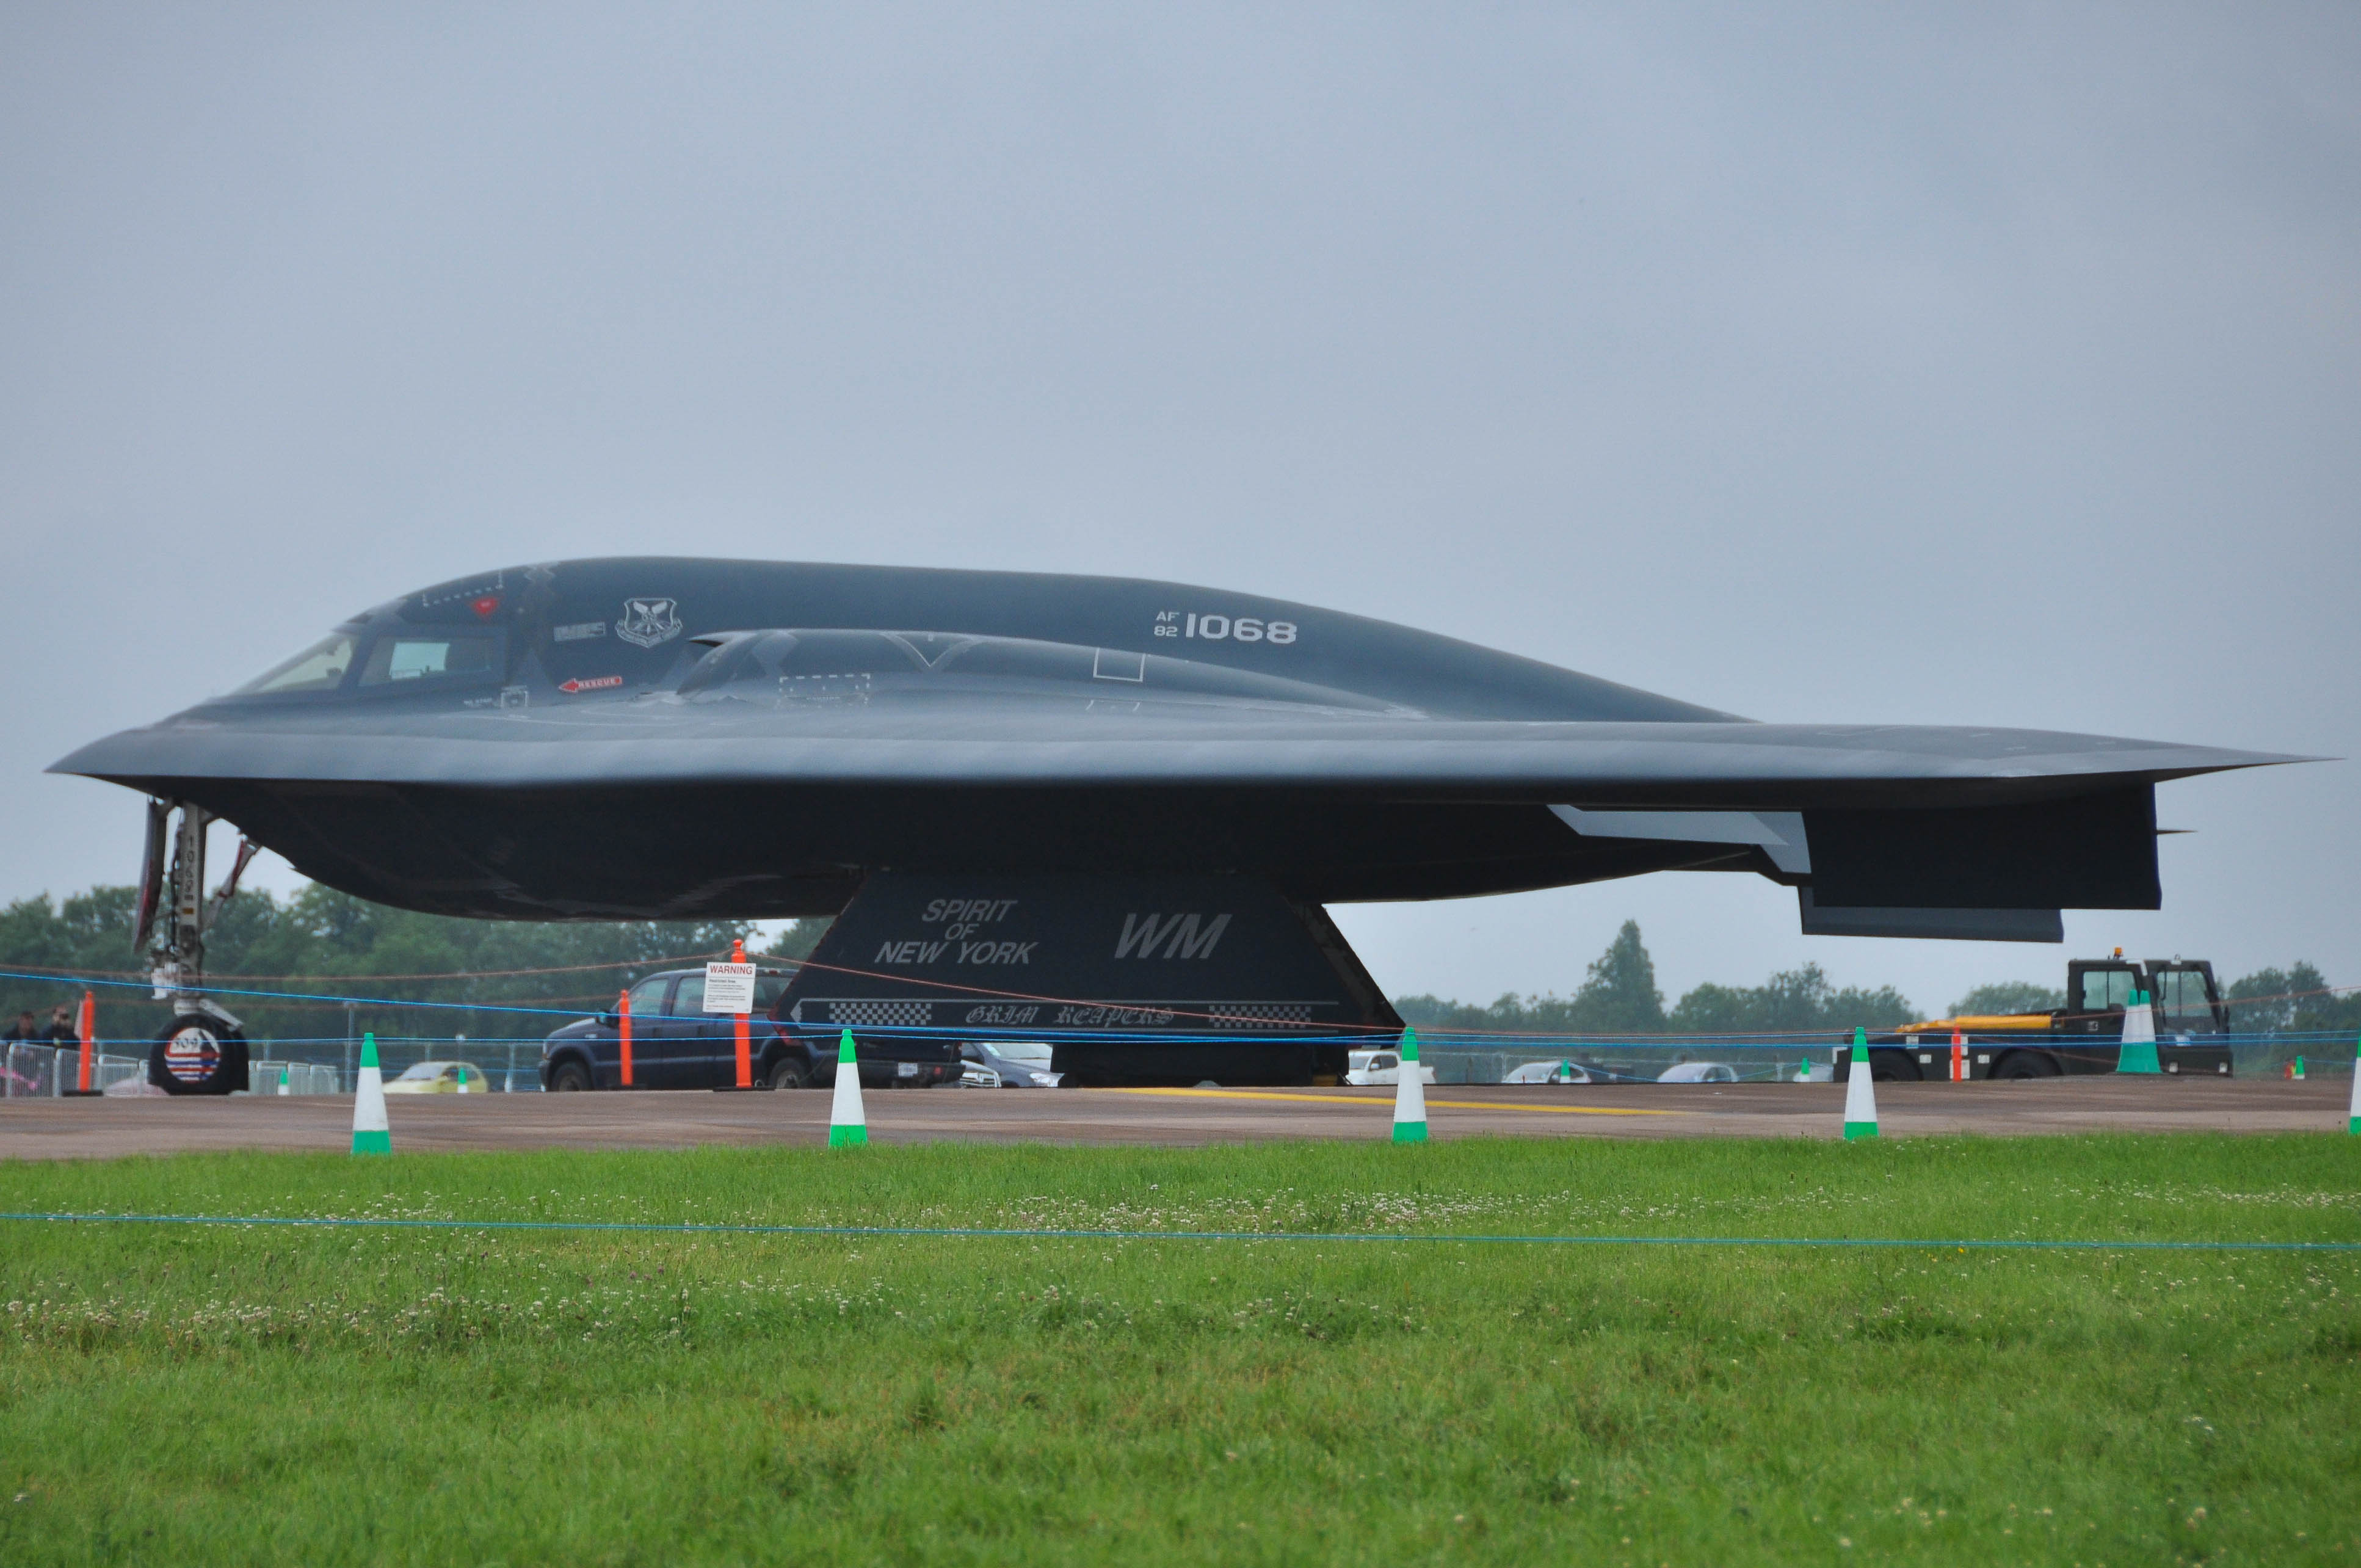 82-1068/821068 USAF - United States Air Force Northrop B-2 Spirit Photo by colinw - AVSpotters.com